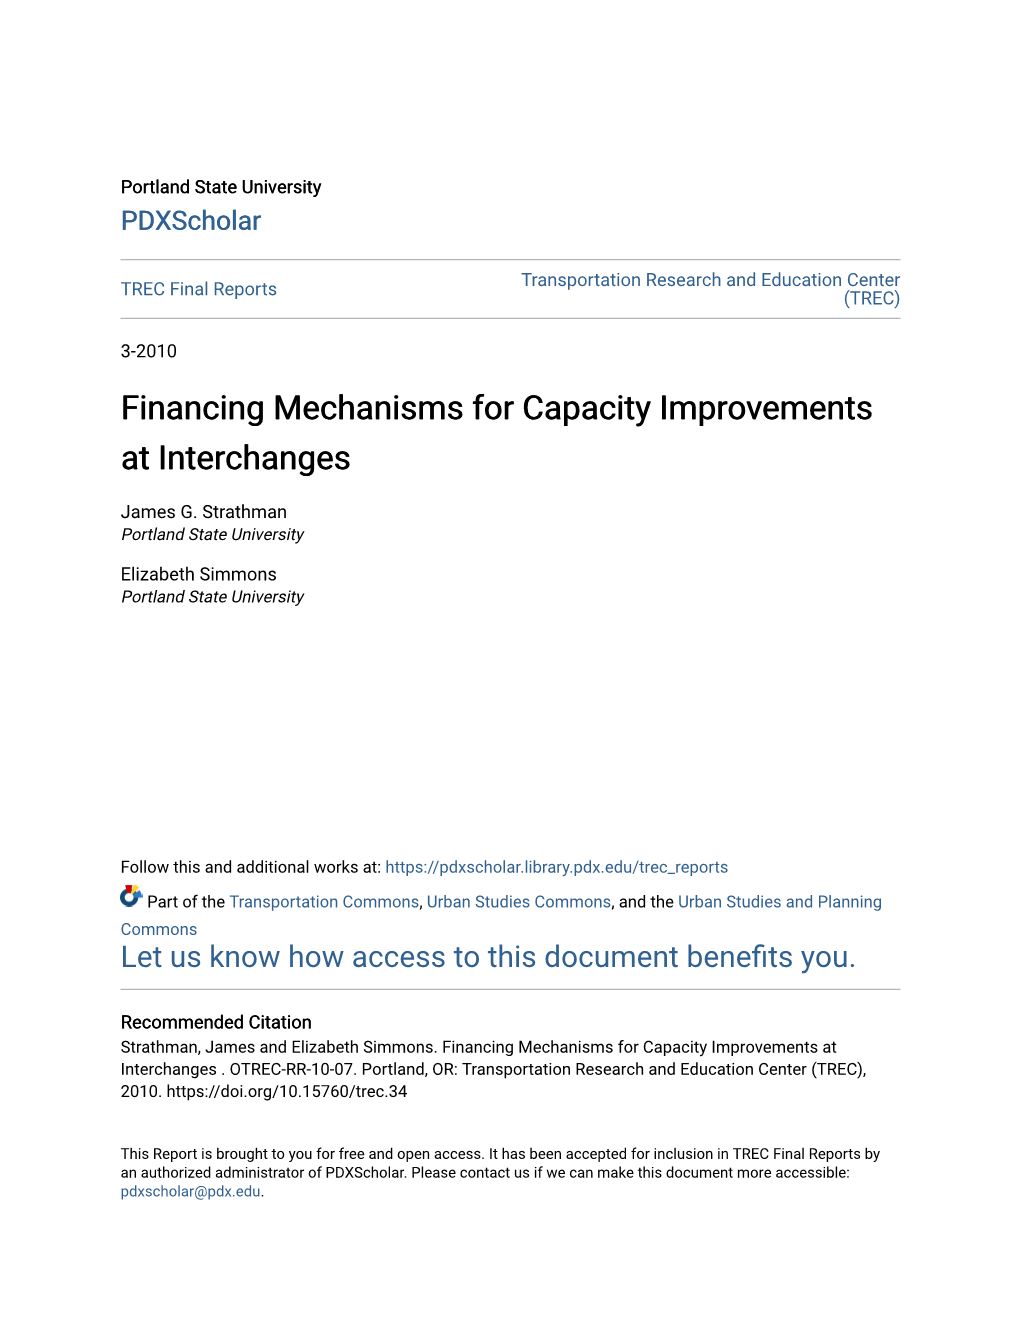 Financing Mechanisms for Capacity Improvements at Interchanges